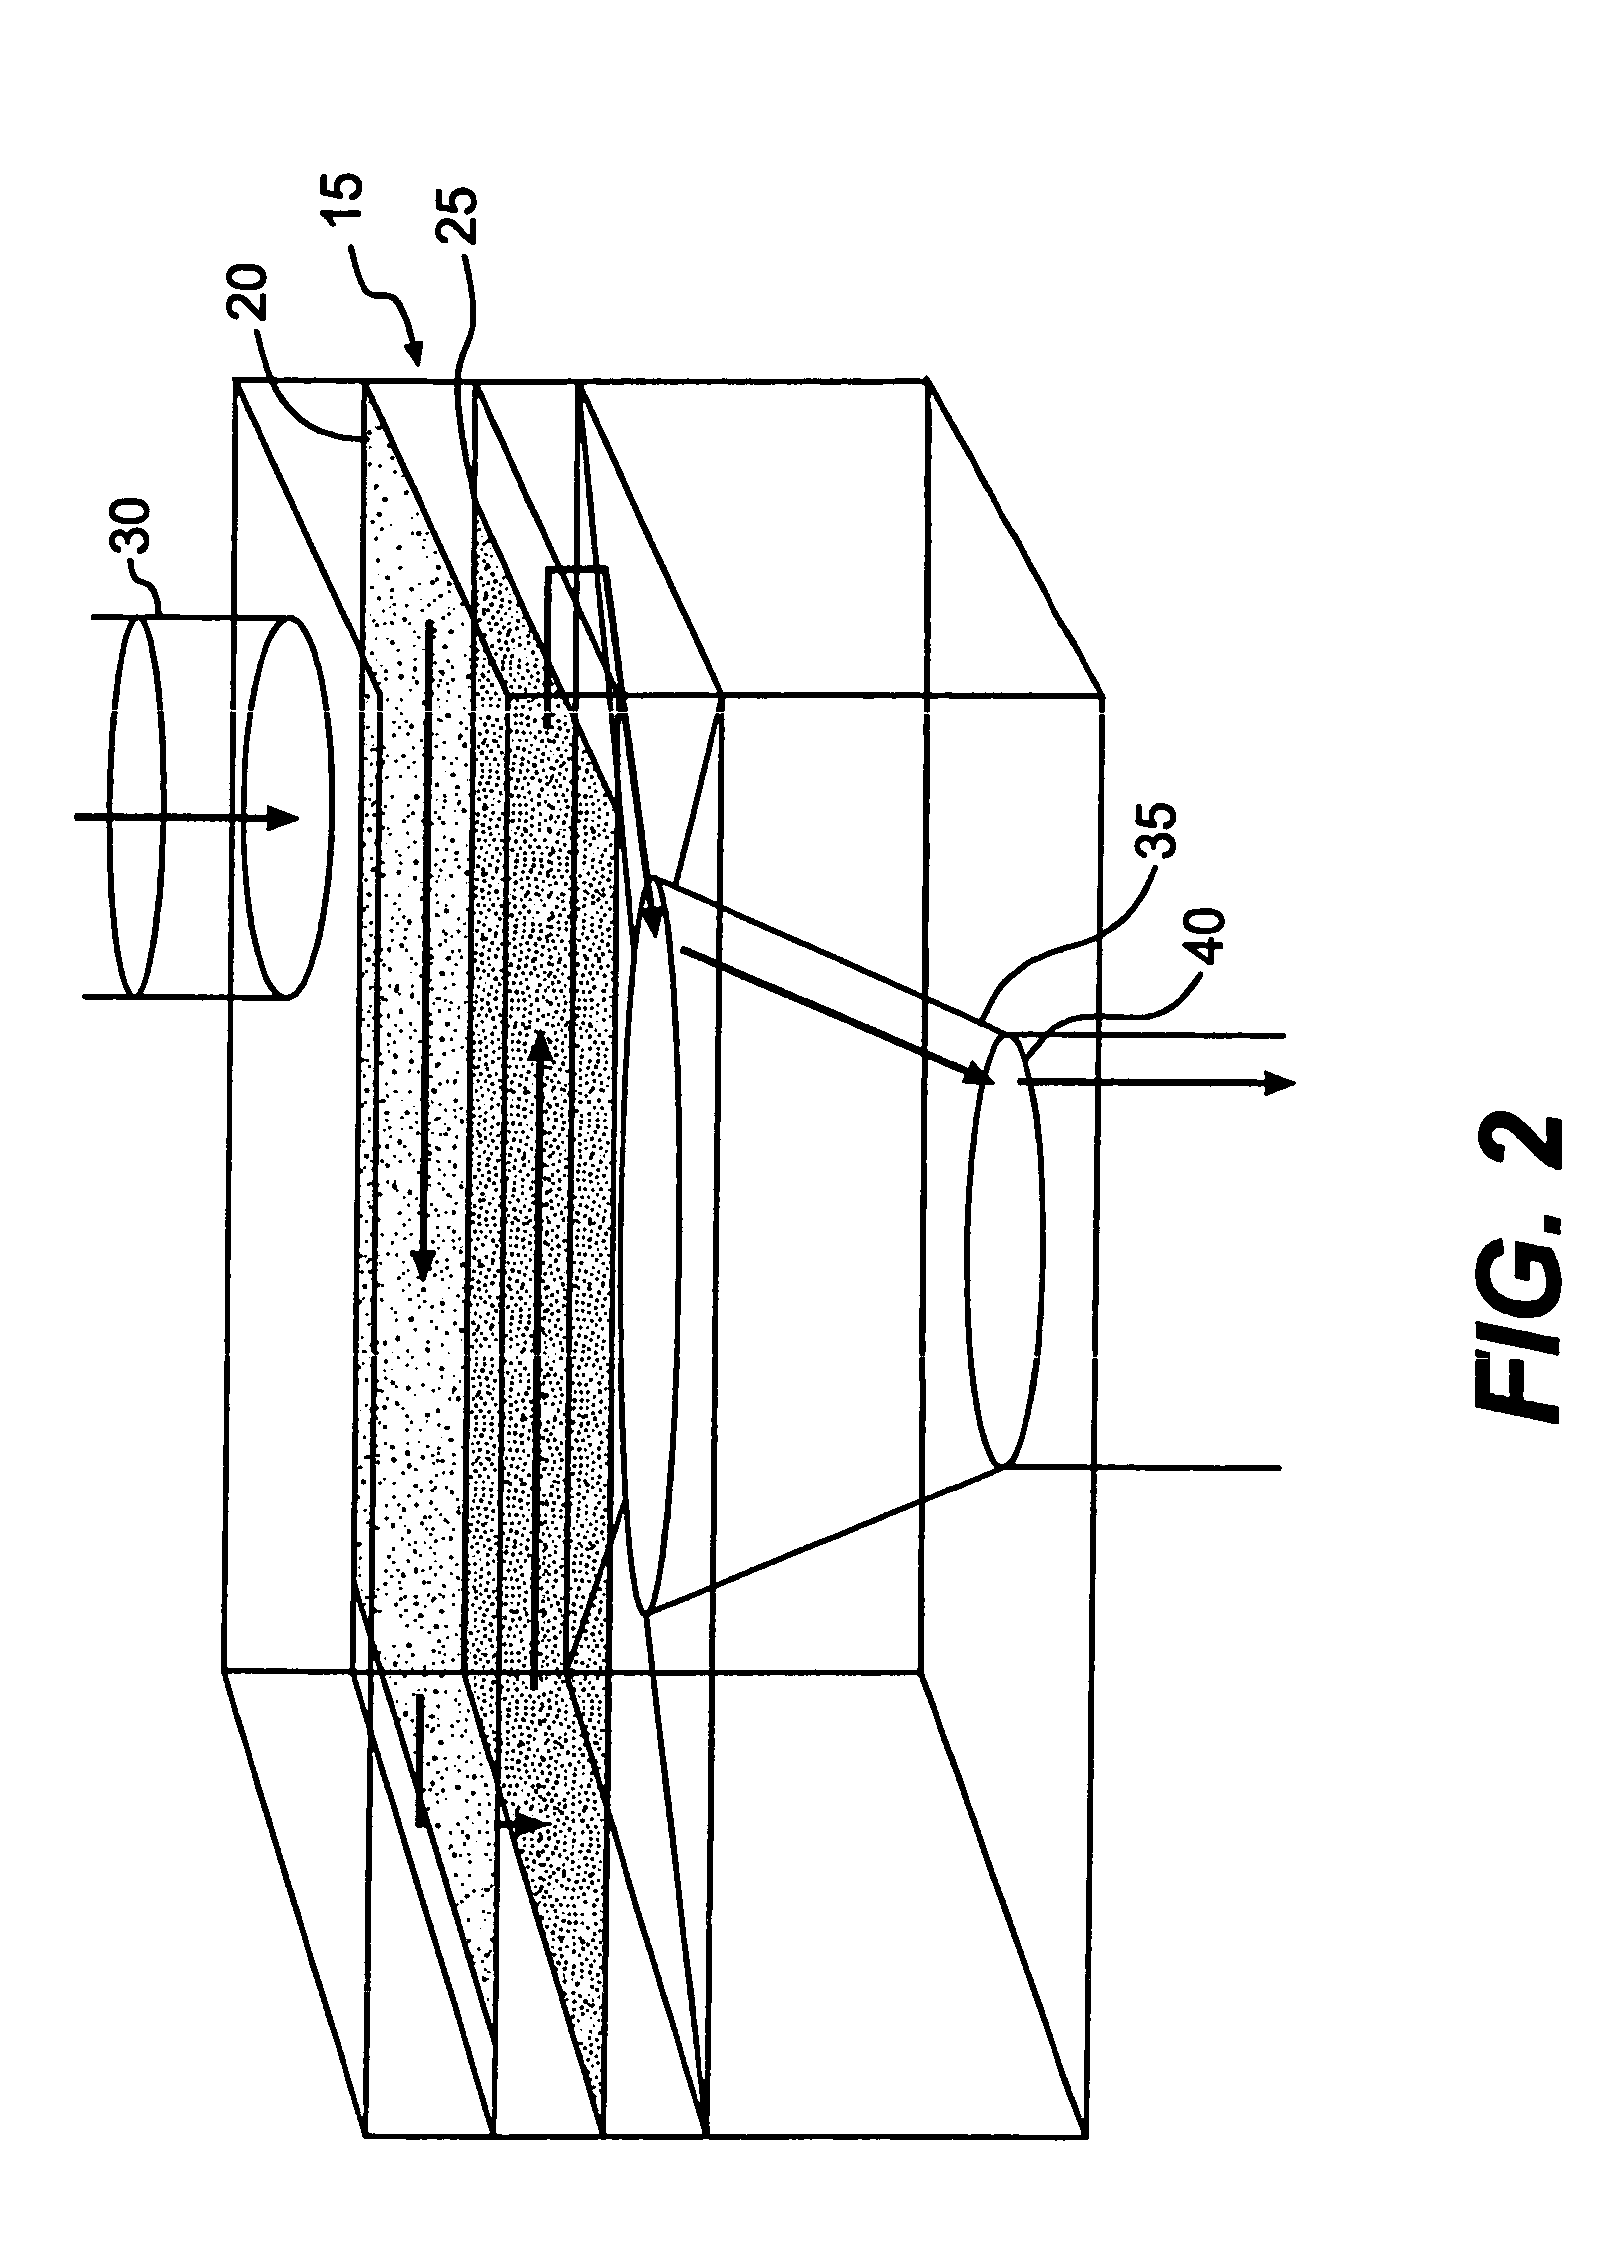 Device and method for in-line blood testing using biochips